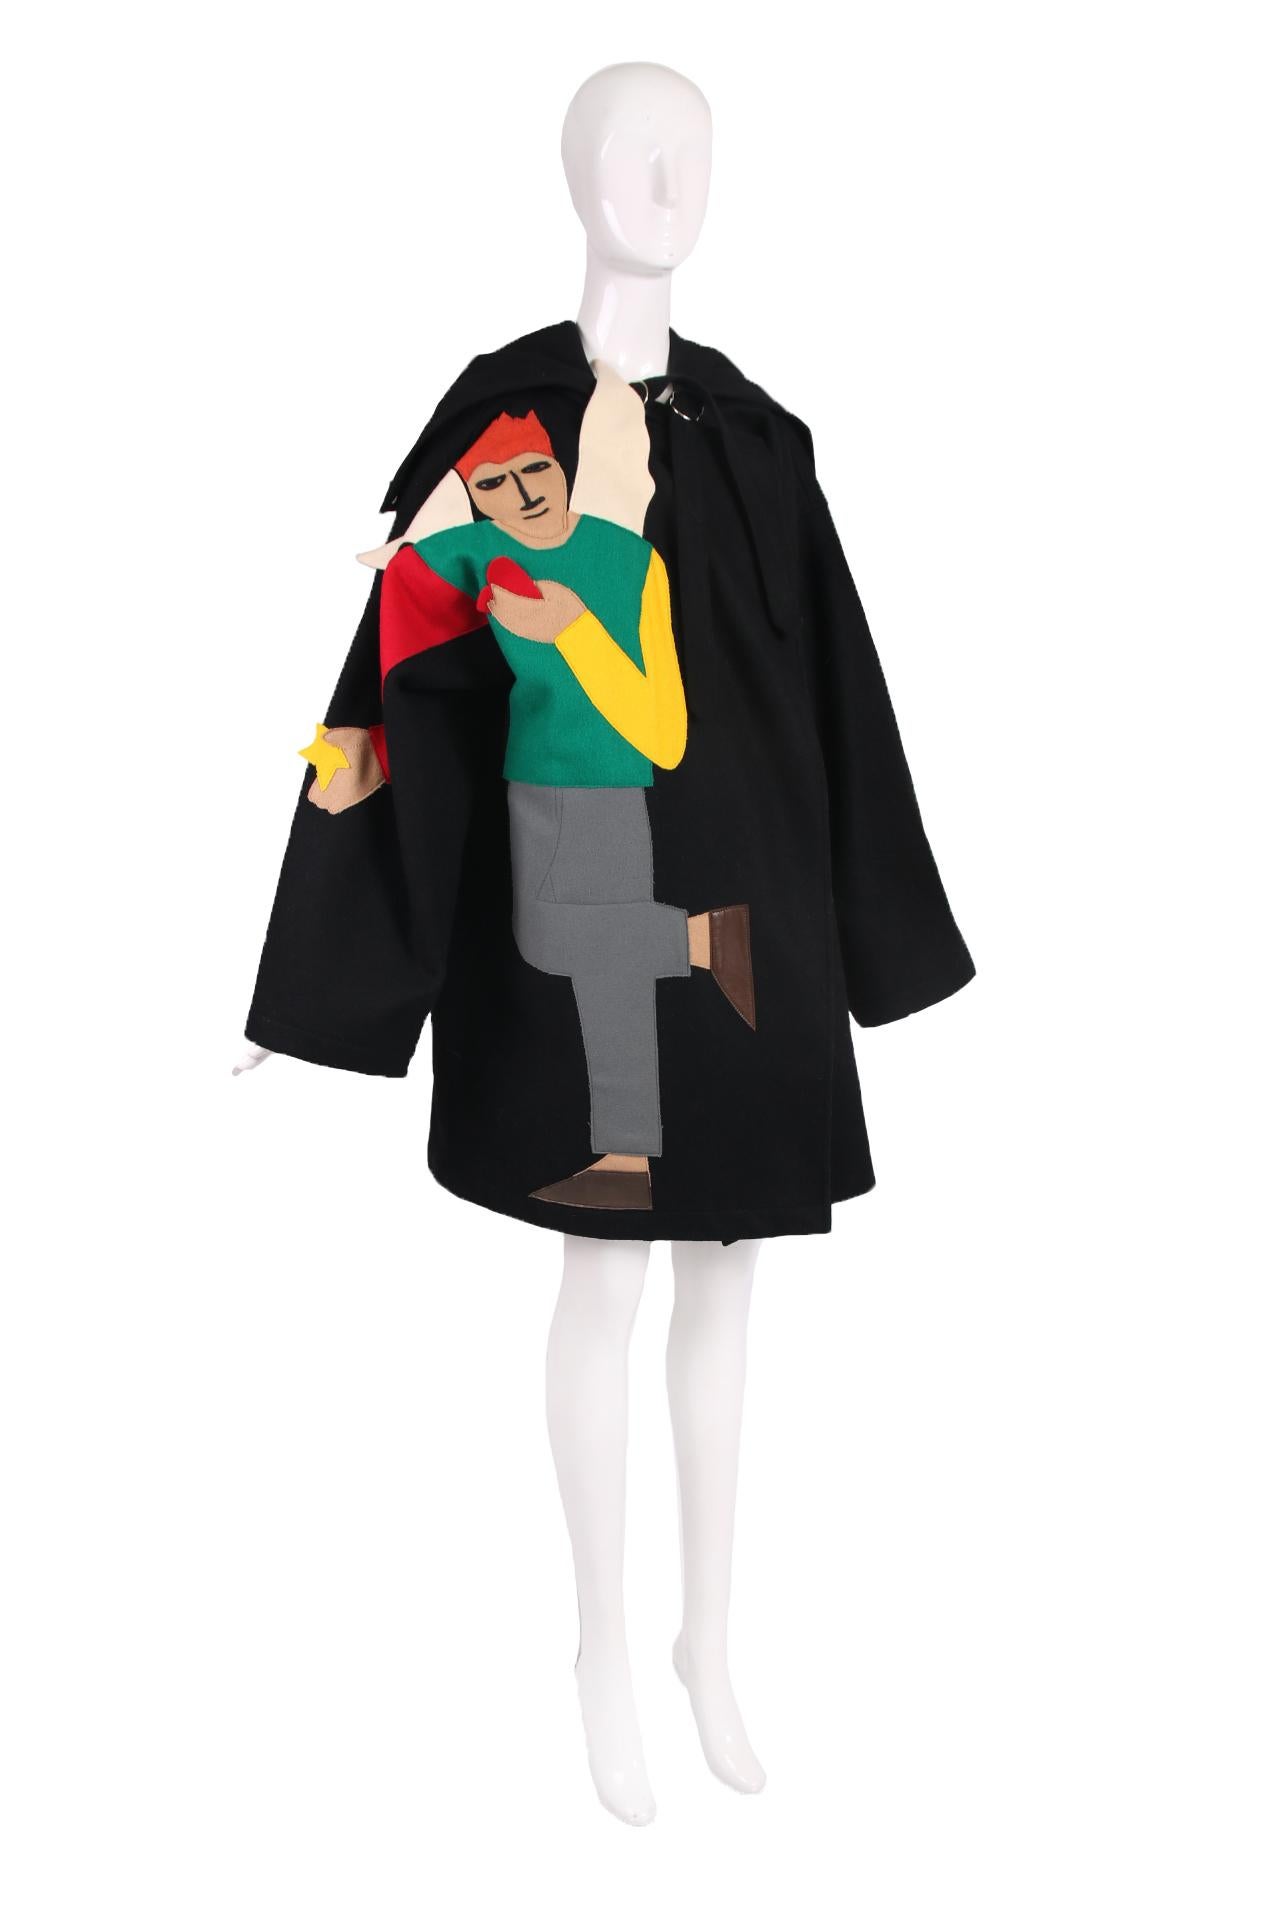 Rare Jean-Charles de Castelbajac Ko and Co black melton wool oversized coat featuring a red-headed, winged man wearing leather booties and holding a red heart in one hand and a yellow star in the other. Has hidden side pockets, a collar that snaps